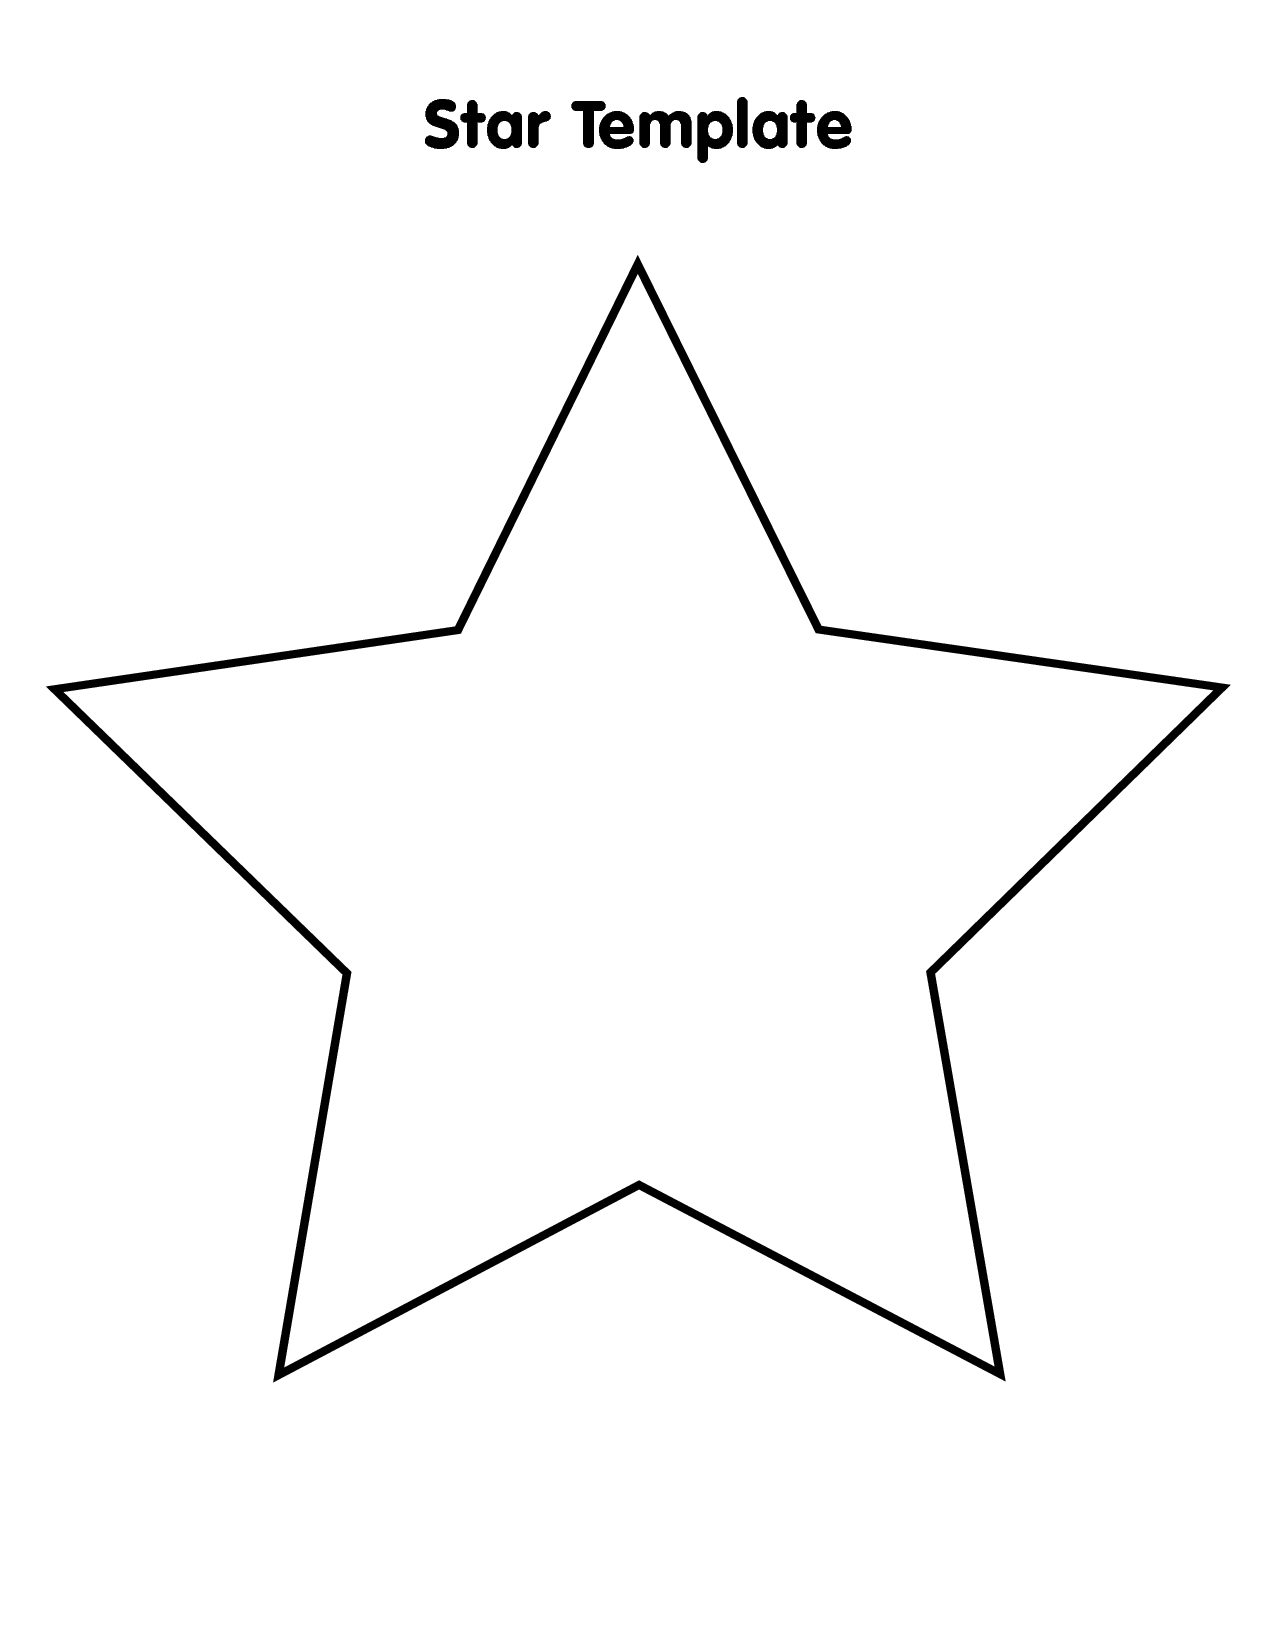 7 Best Images of Free Printable Star Templates Large Star Template